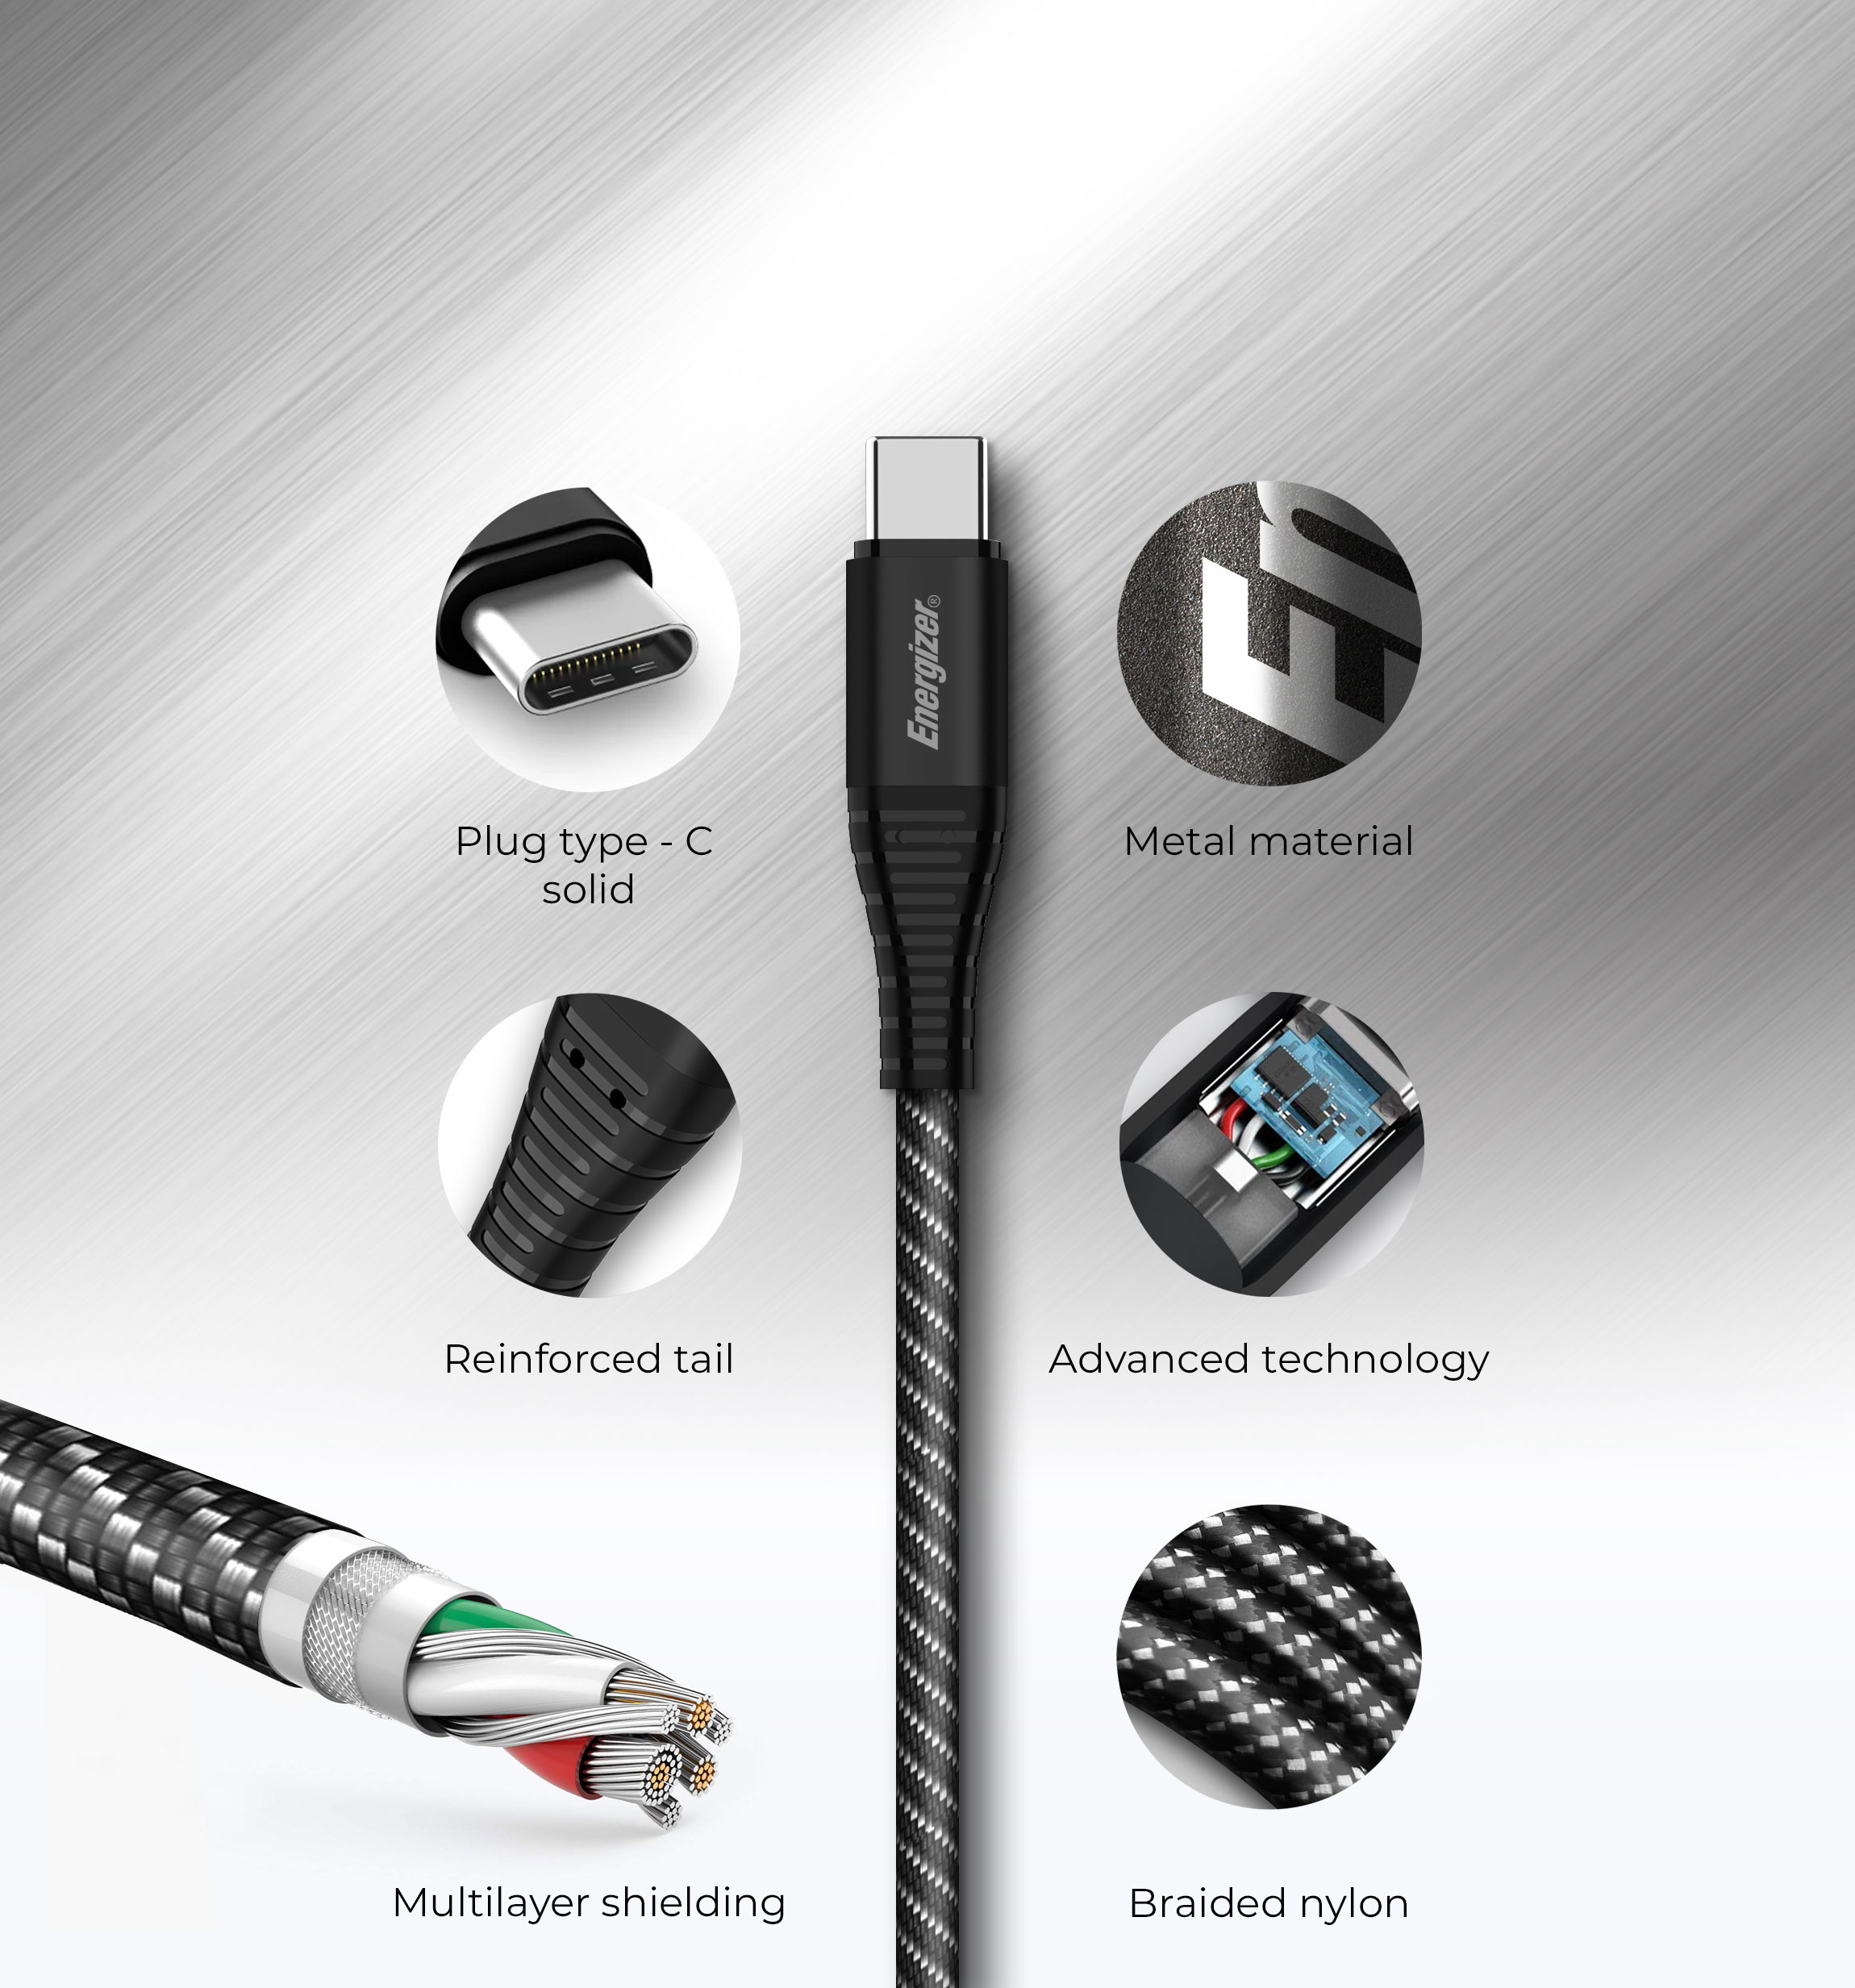 Energizer Mobile: View accessories